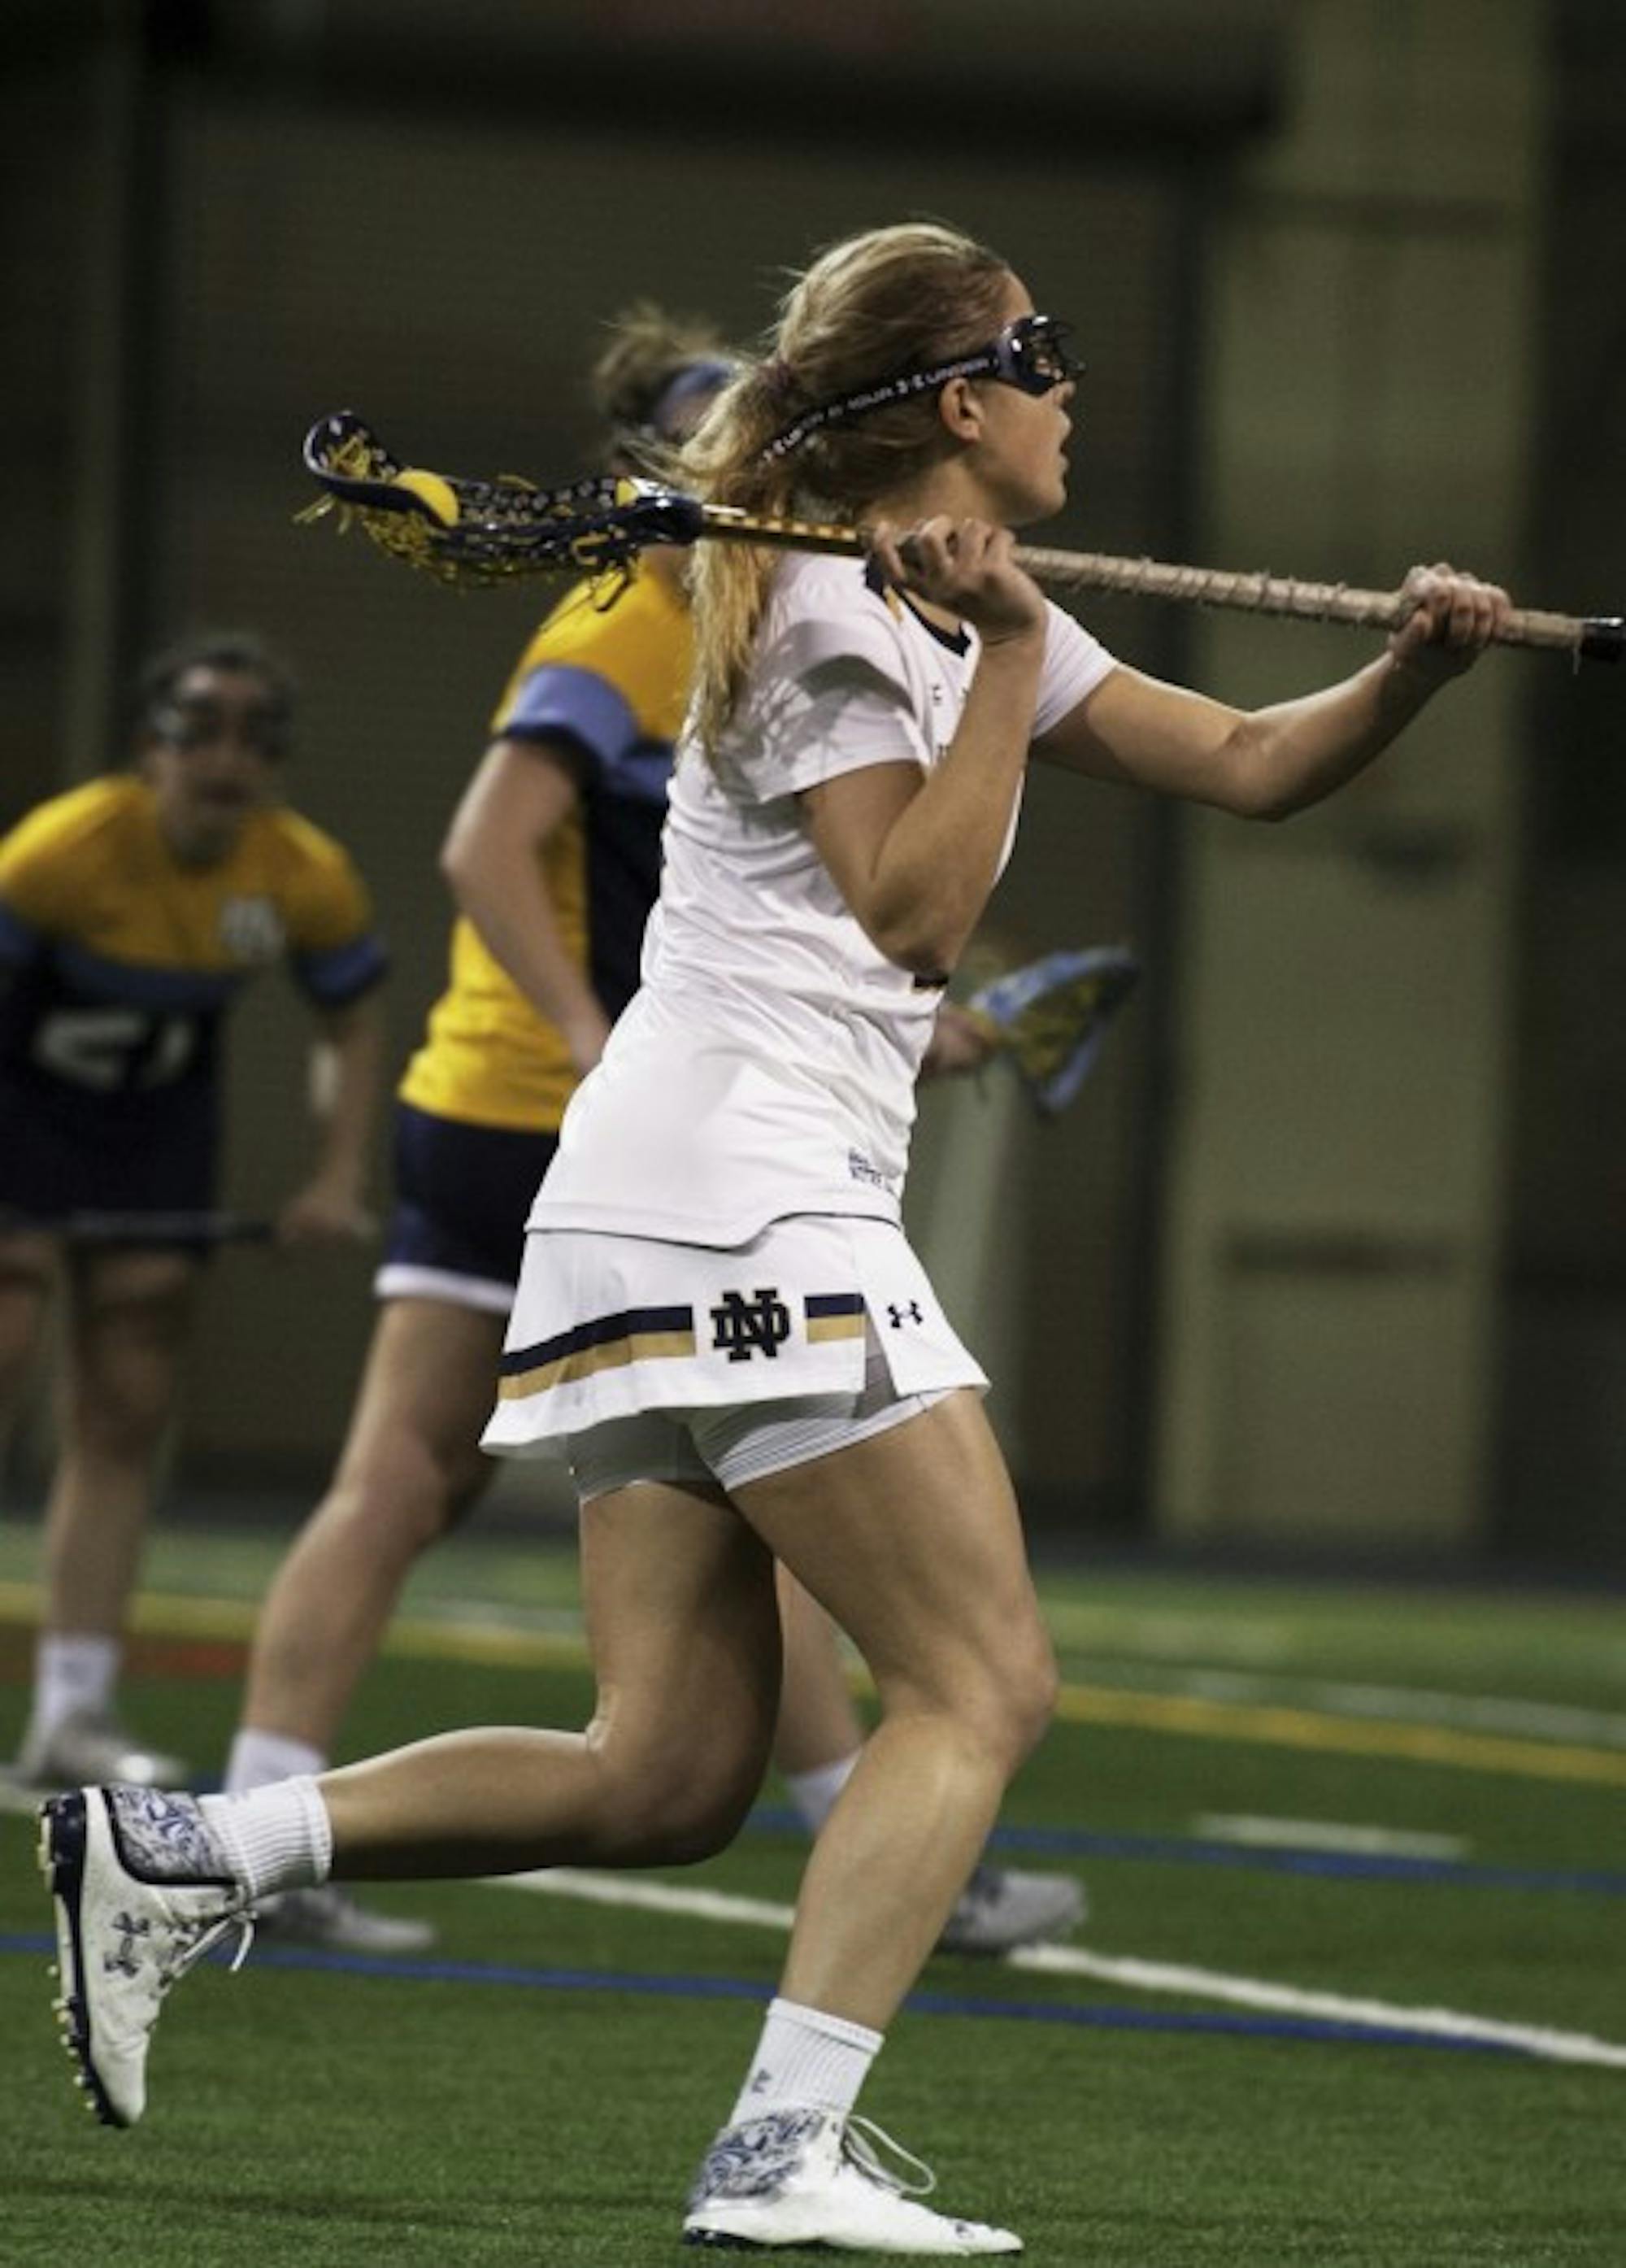 Irish senior attack Grace Muller looks to make a play during Notre Dame's 21-9 victory over Marquette on Feb. 14 at Loftus Sports Complex.